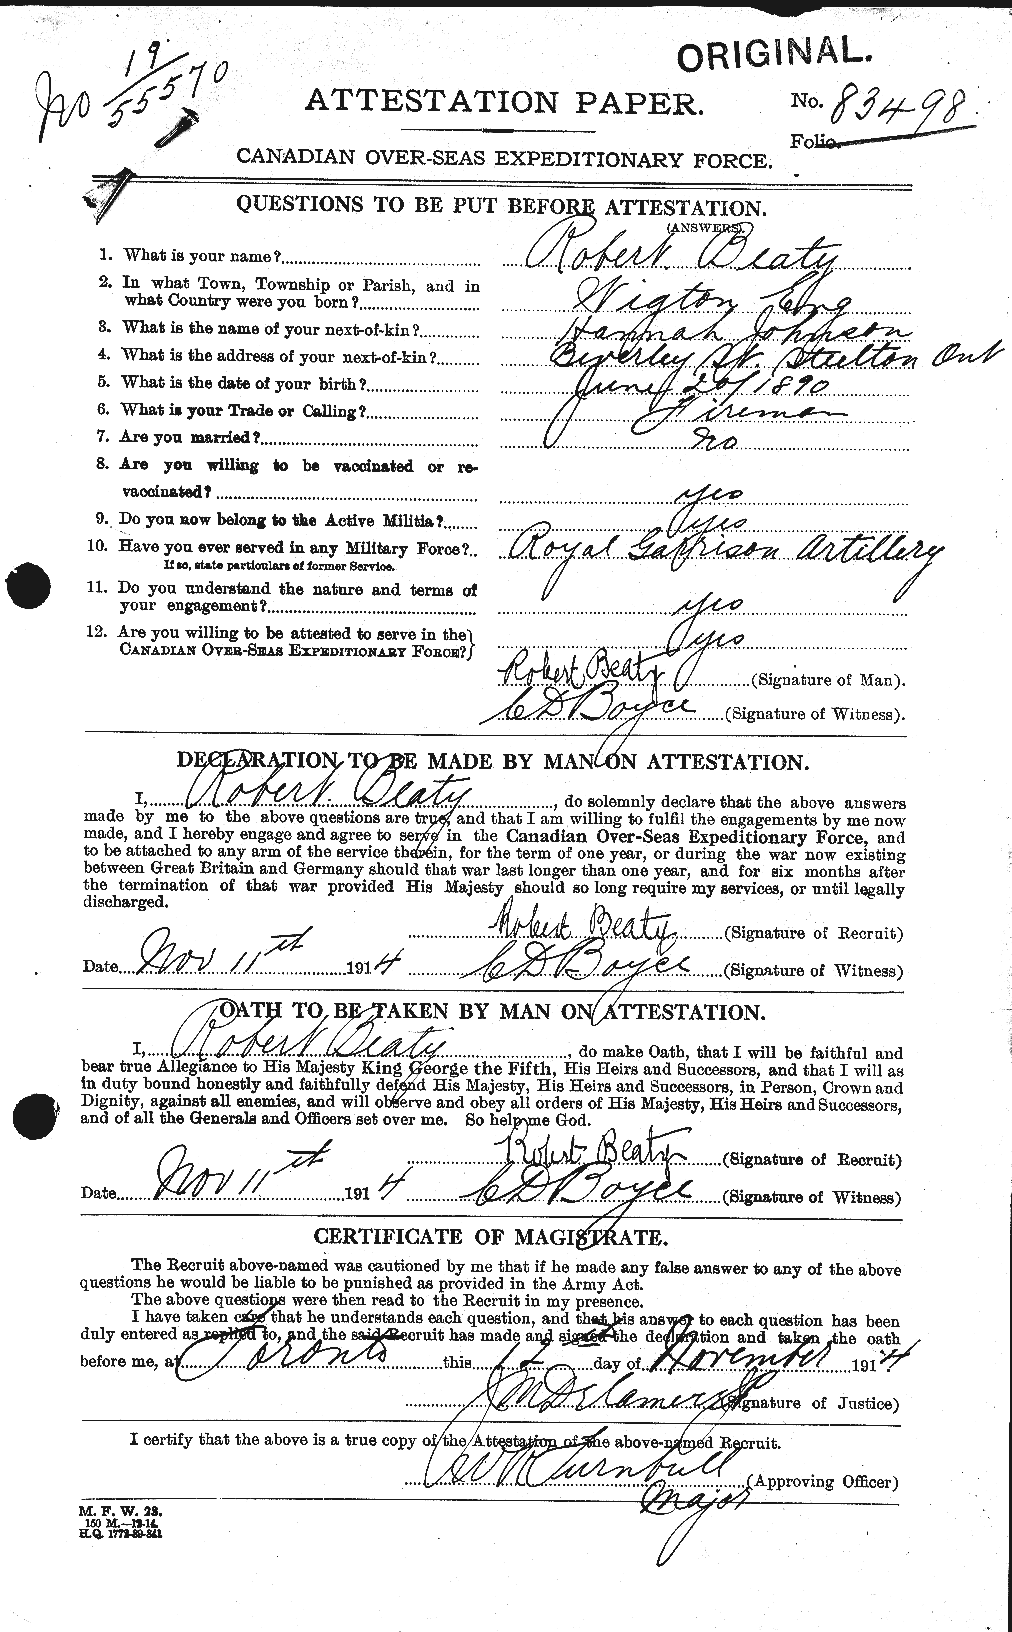 Personnel Records of the First World War - CEF 230890a